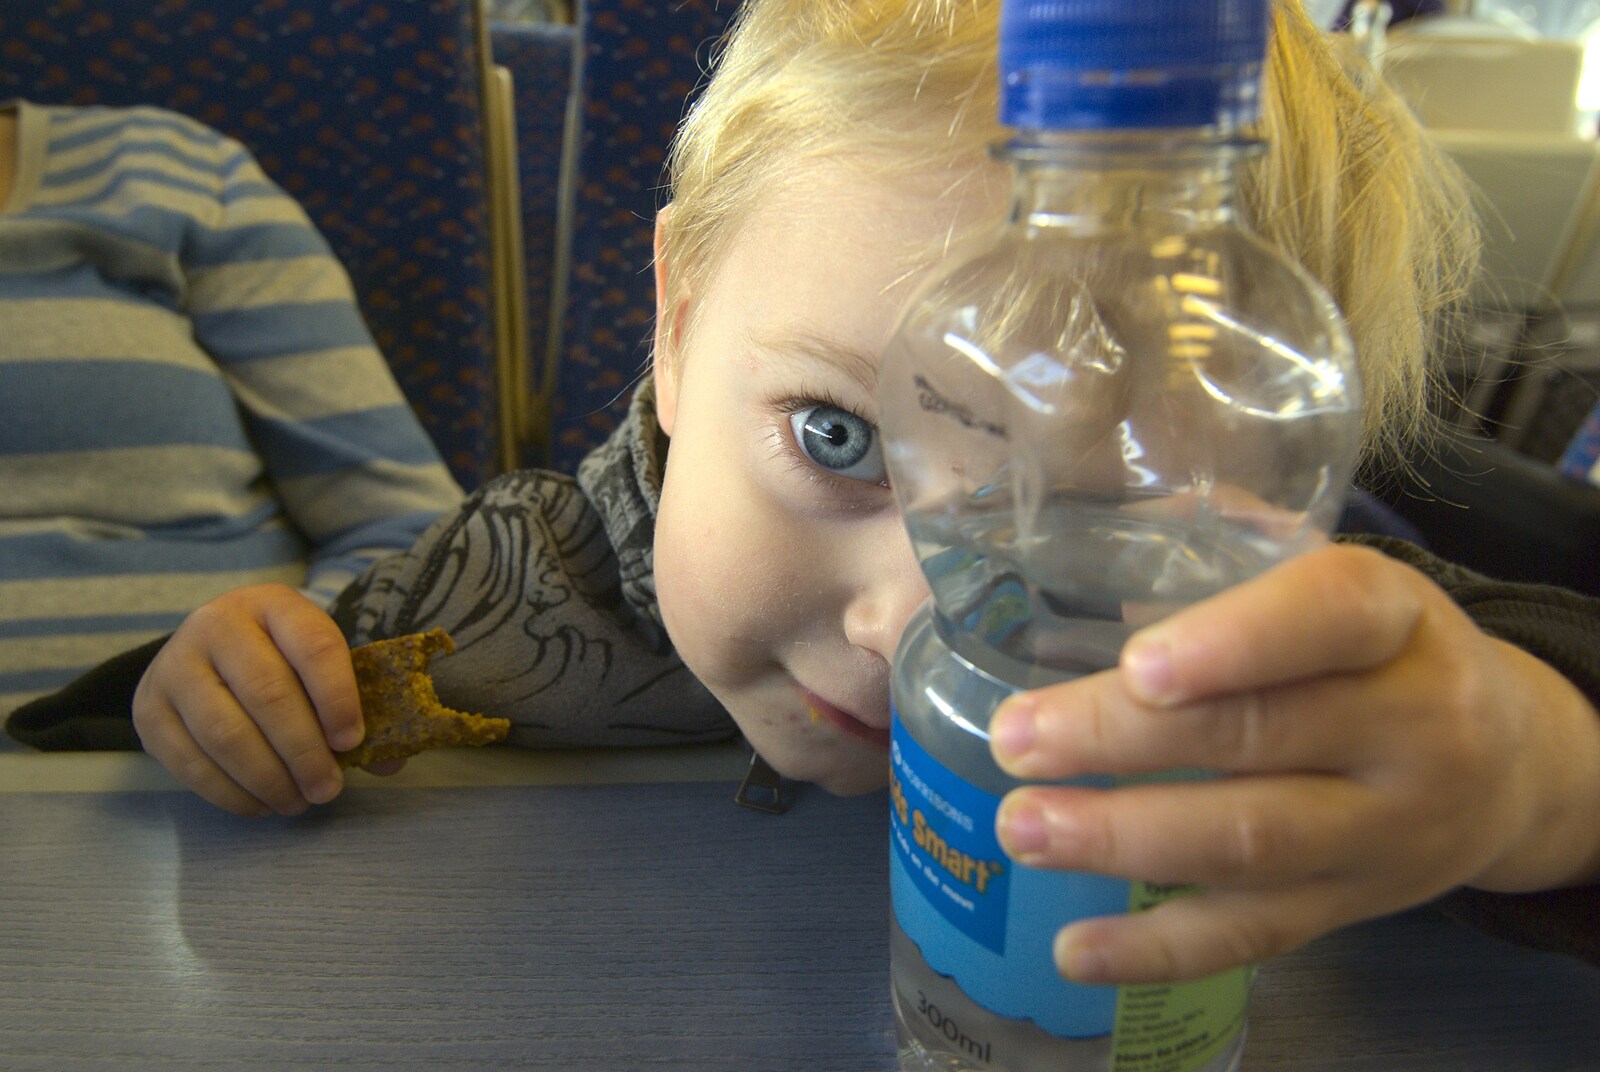 Norwich By Train, Norfolk - 16th October 2010: Fred looks through a bottle of water